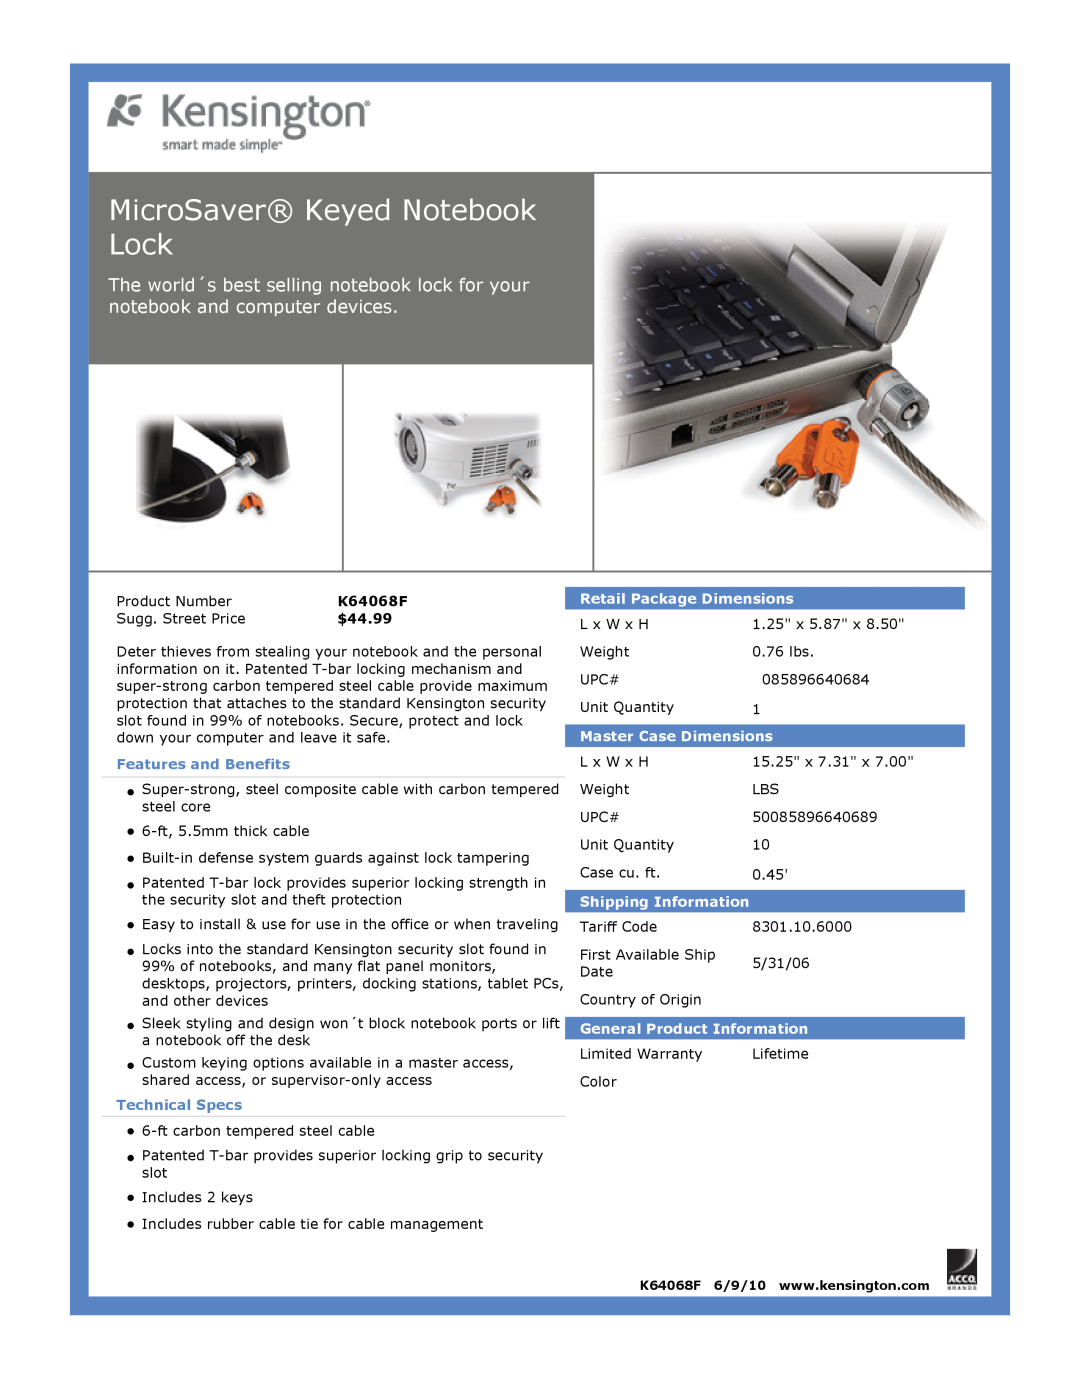 Kensington EU64325 MicroSaver Keyed Notebook Lock, $44.99, Features and Benefits, Technical Specs, Master Case Dimensions 